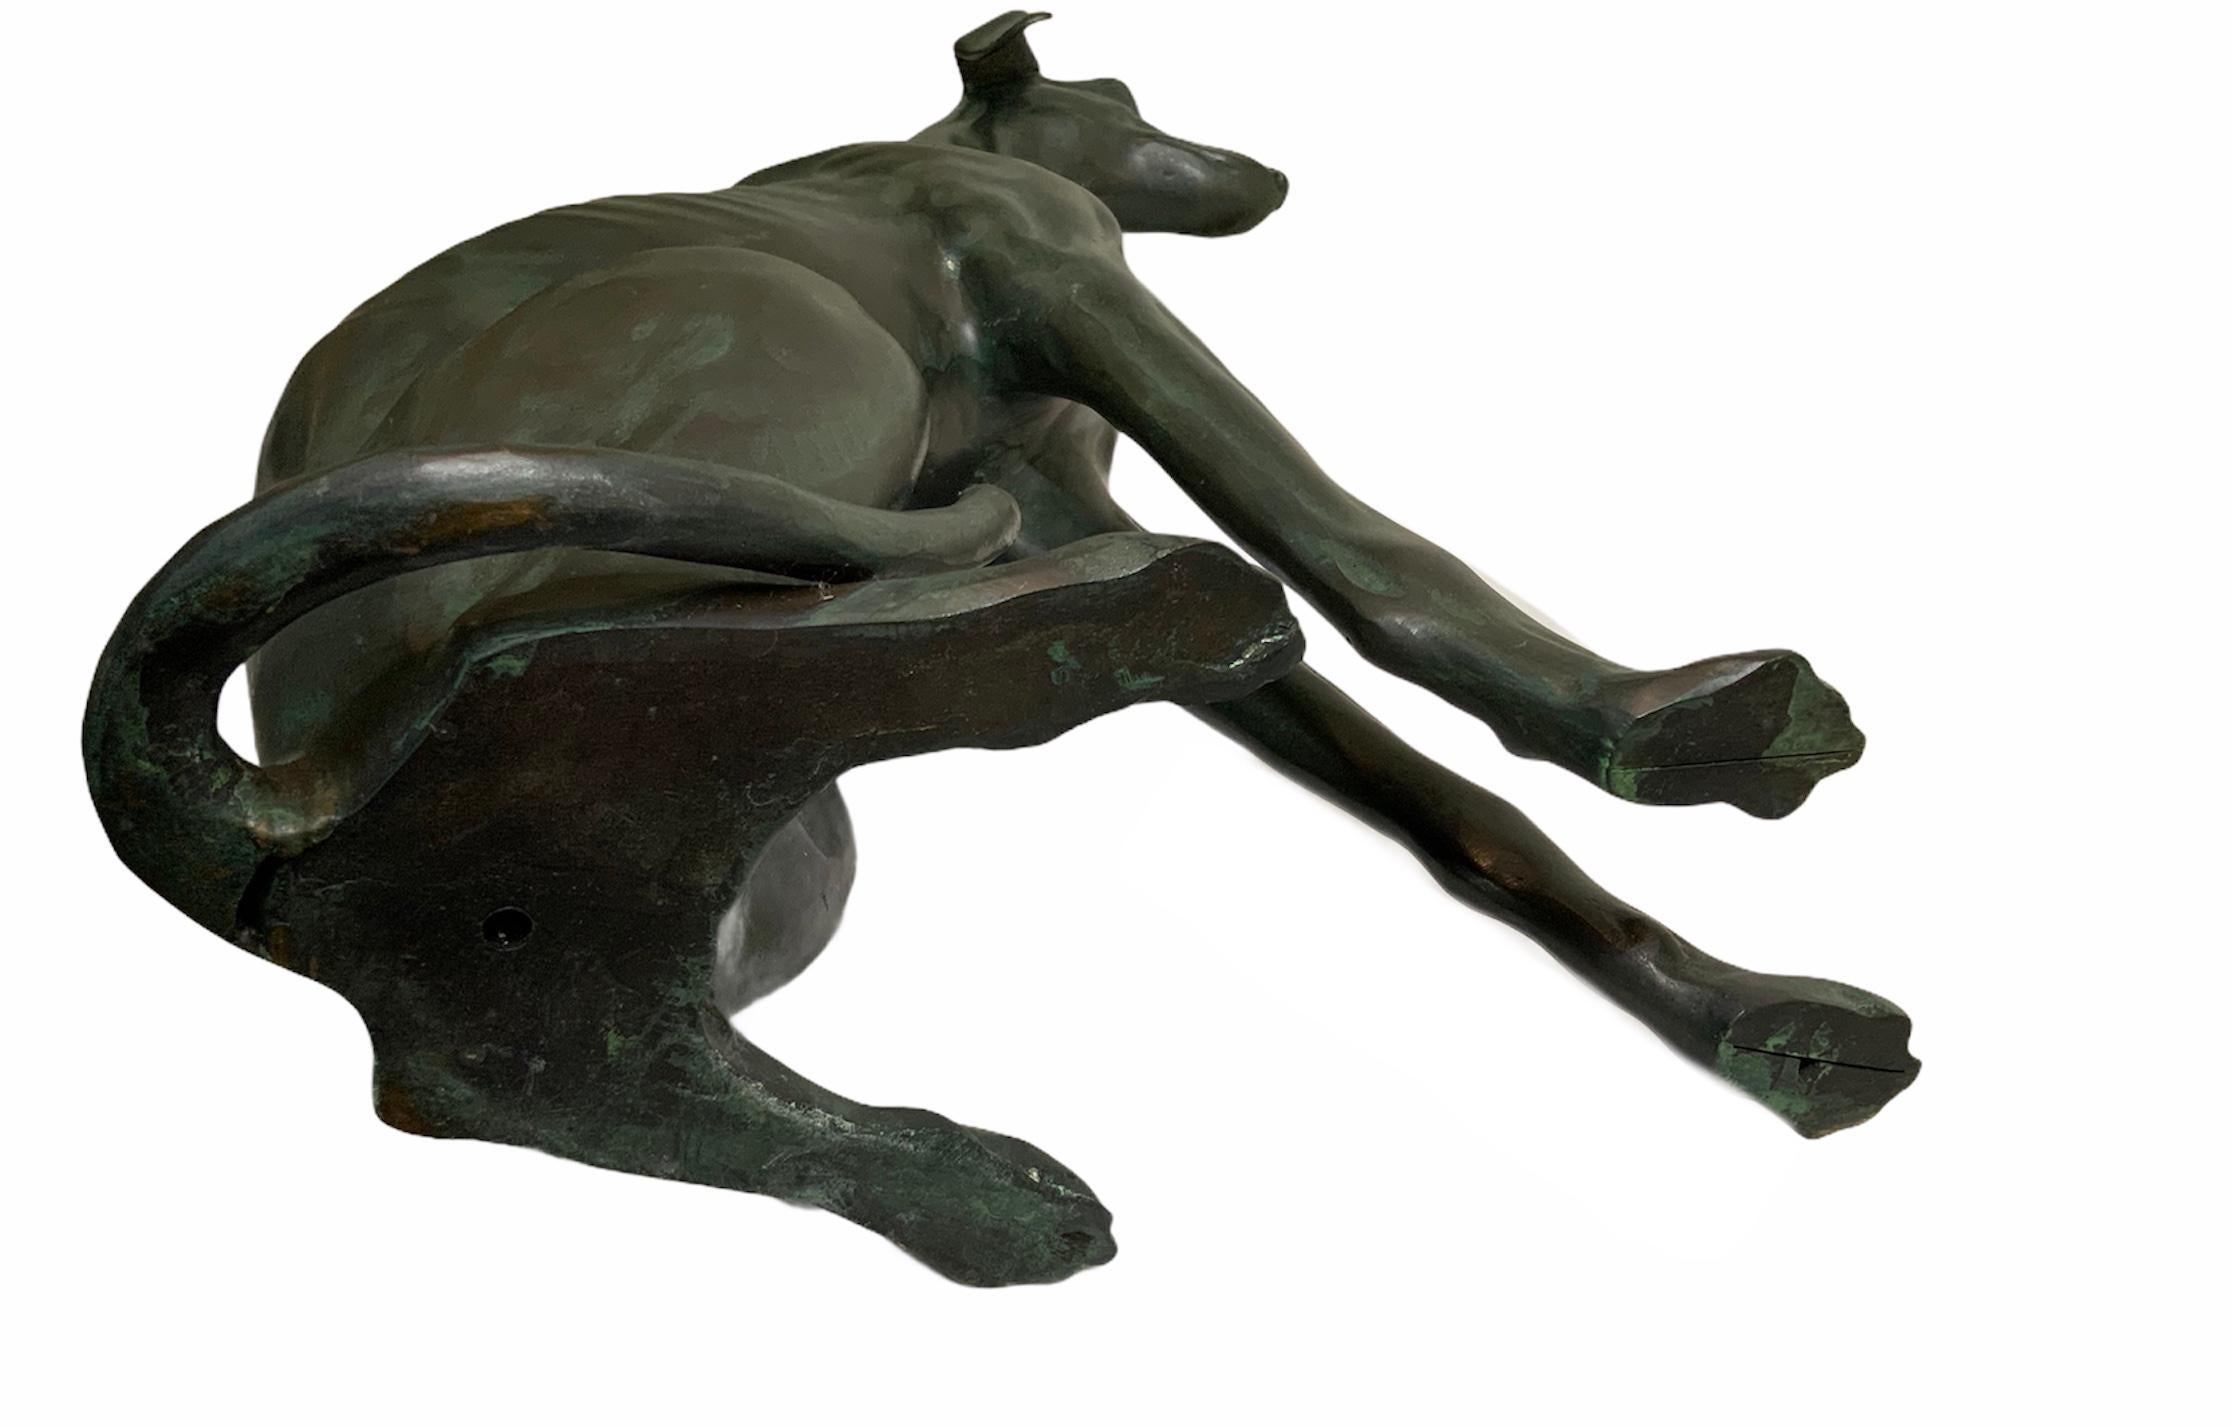 This is a pair of patinated bronze whippets dogs. One of the dog is sitting down and its right ear is lifted up. The other one is very relaxed with its long frontal legs stretched. They are very well done and every detail of its body appears real